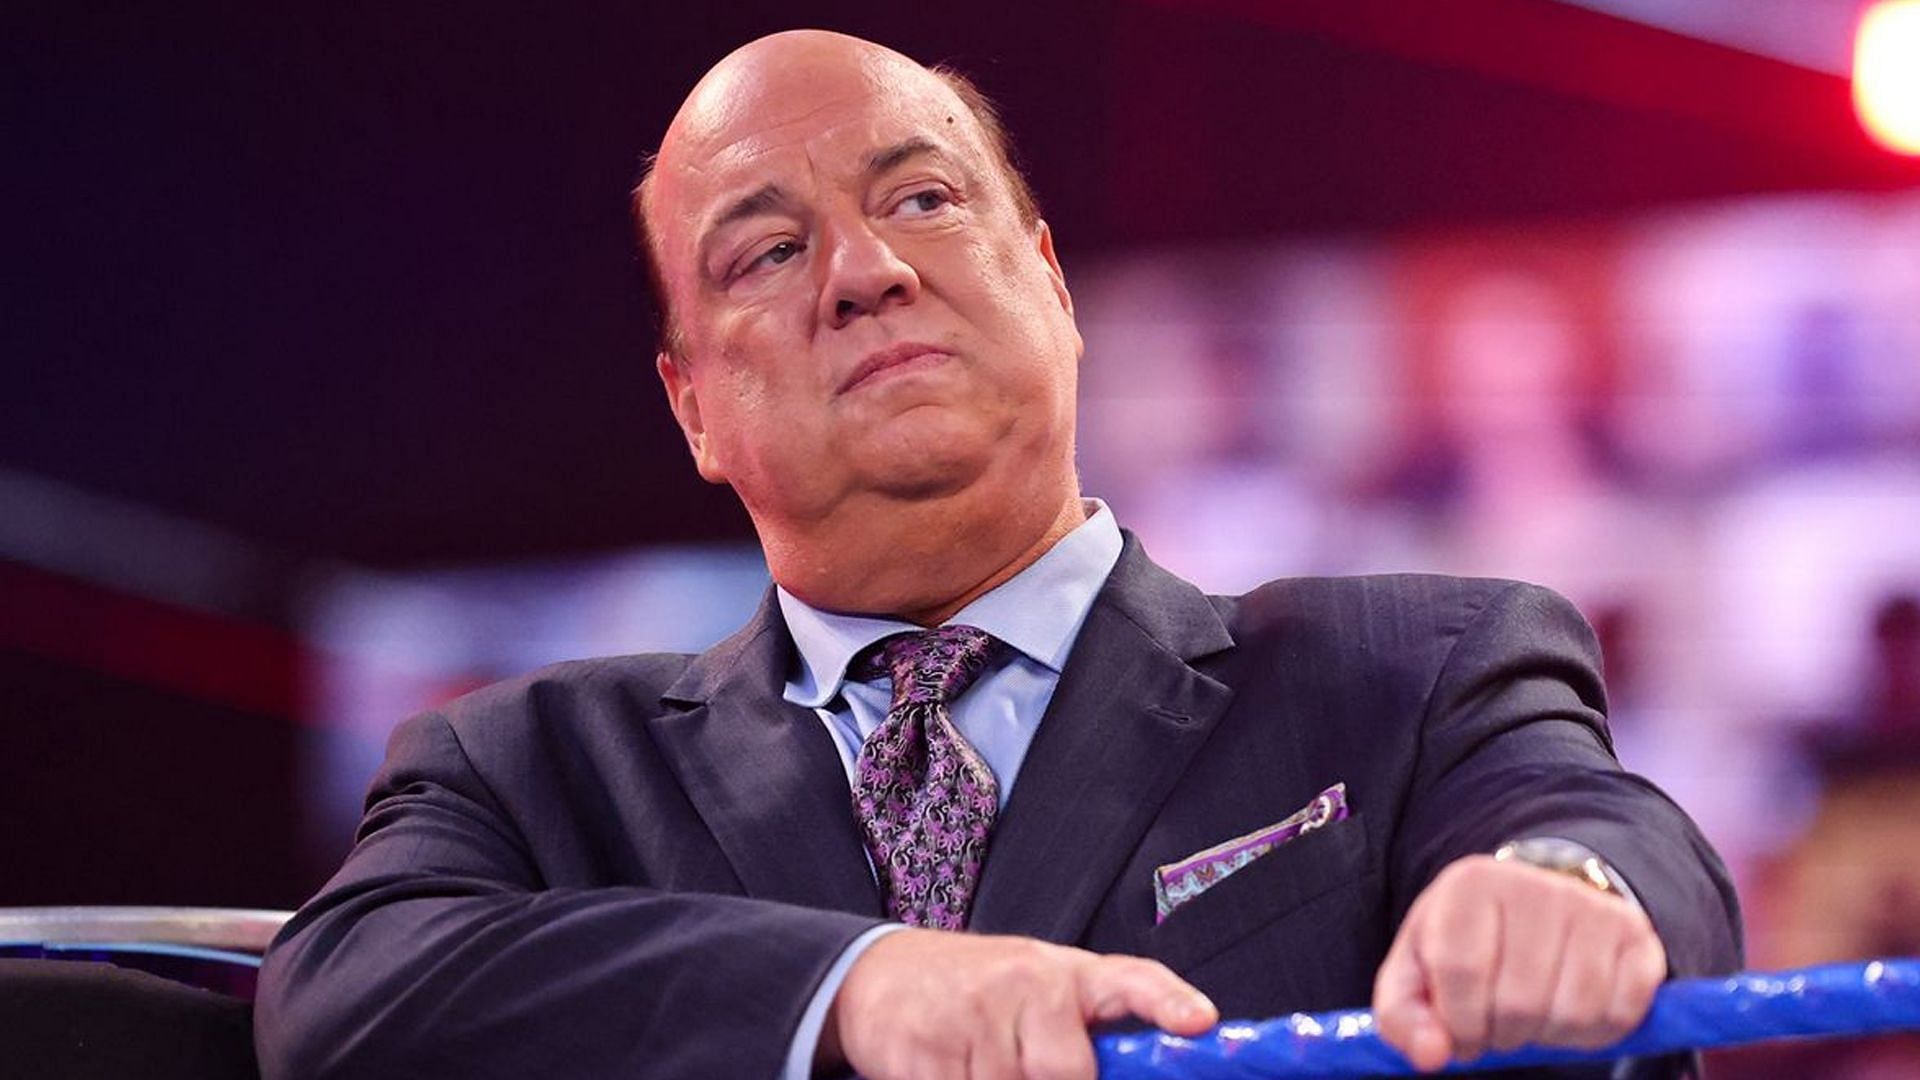 Paul Heyman currently serves as the special counsel to the Tribal Chief Roman Reigns on Friday Night SmackDown